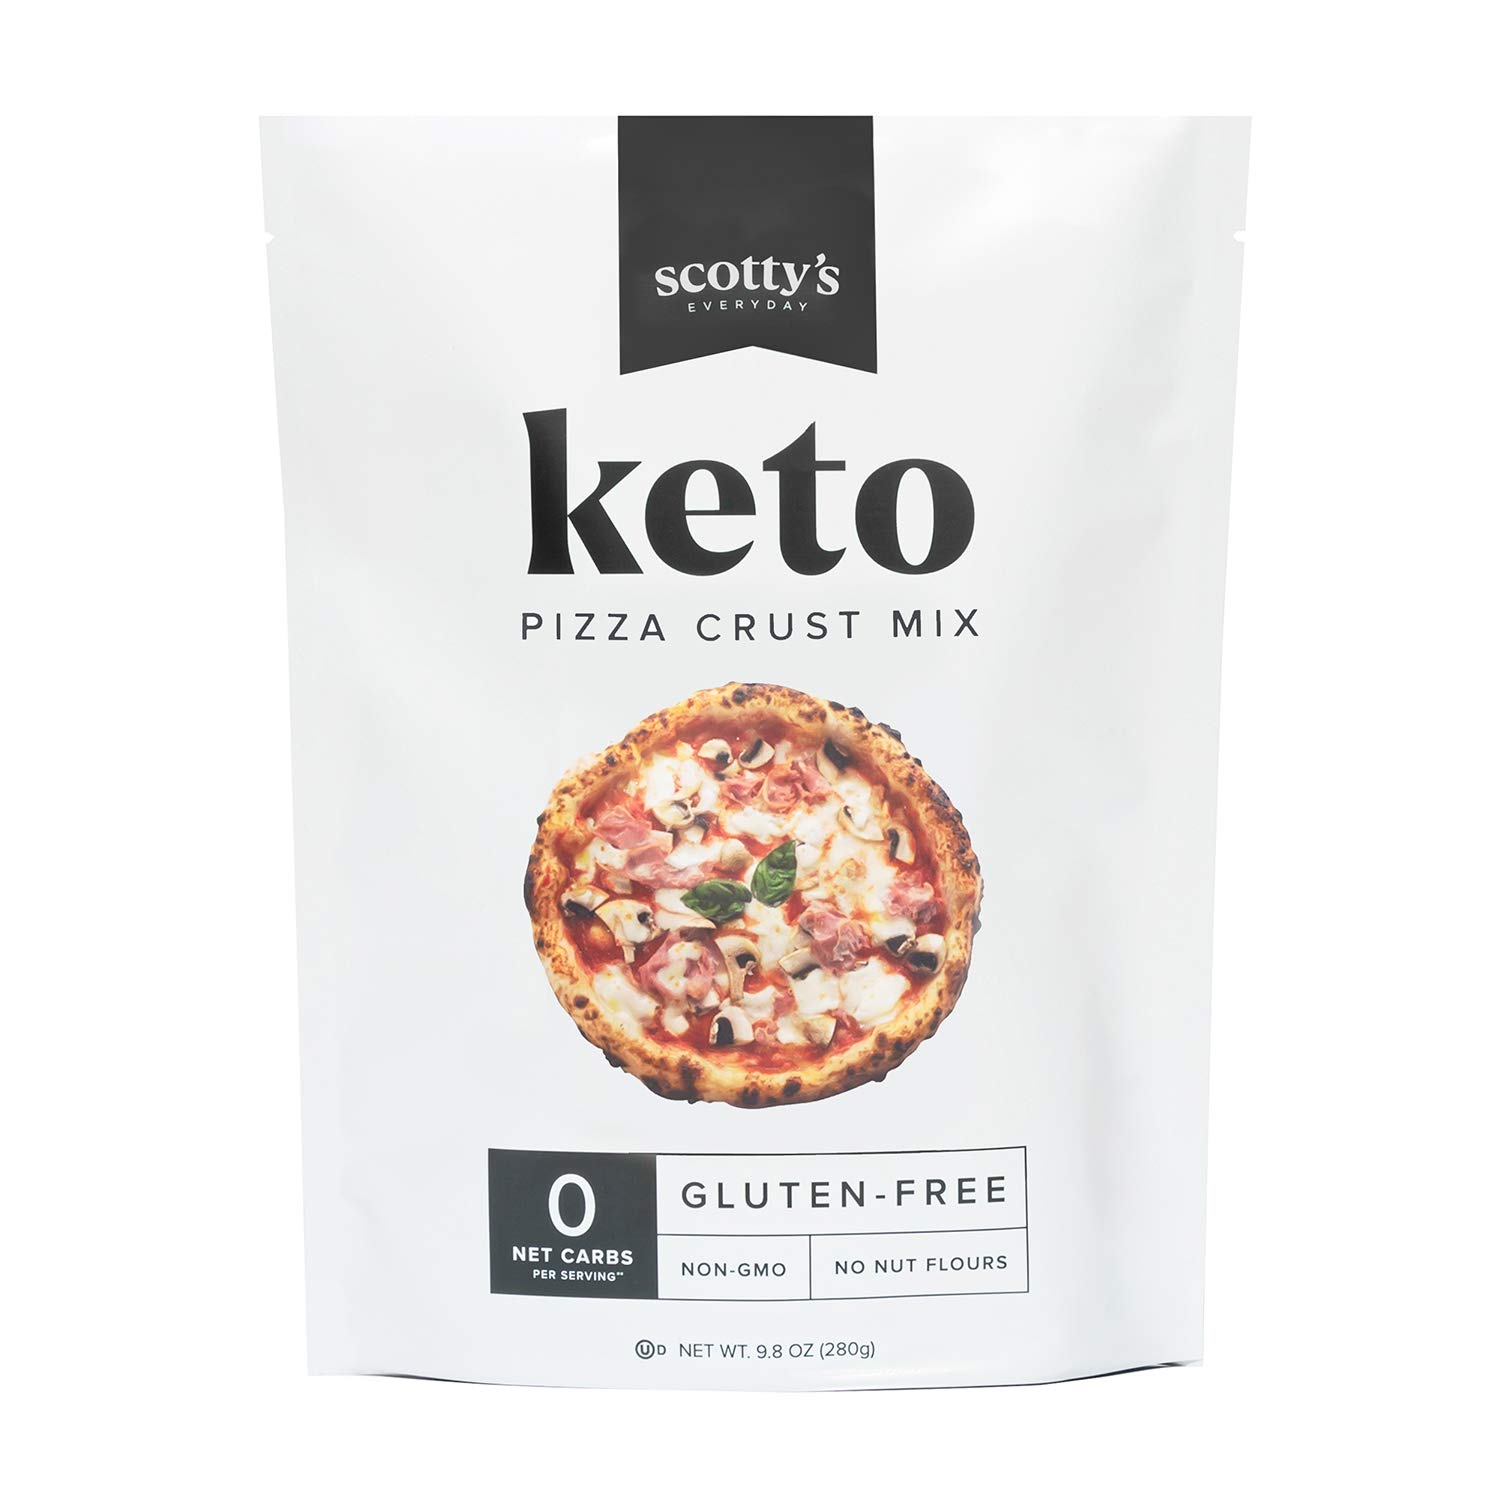 IN STORE ONLY - Keto Pizza Making Kit – Wholesome Keto Treats